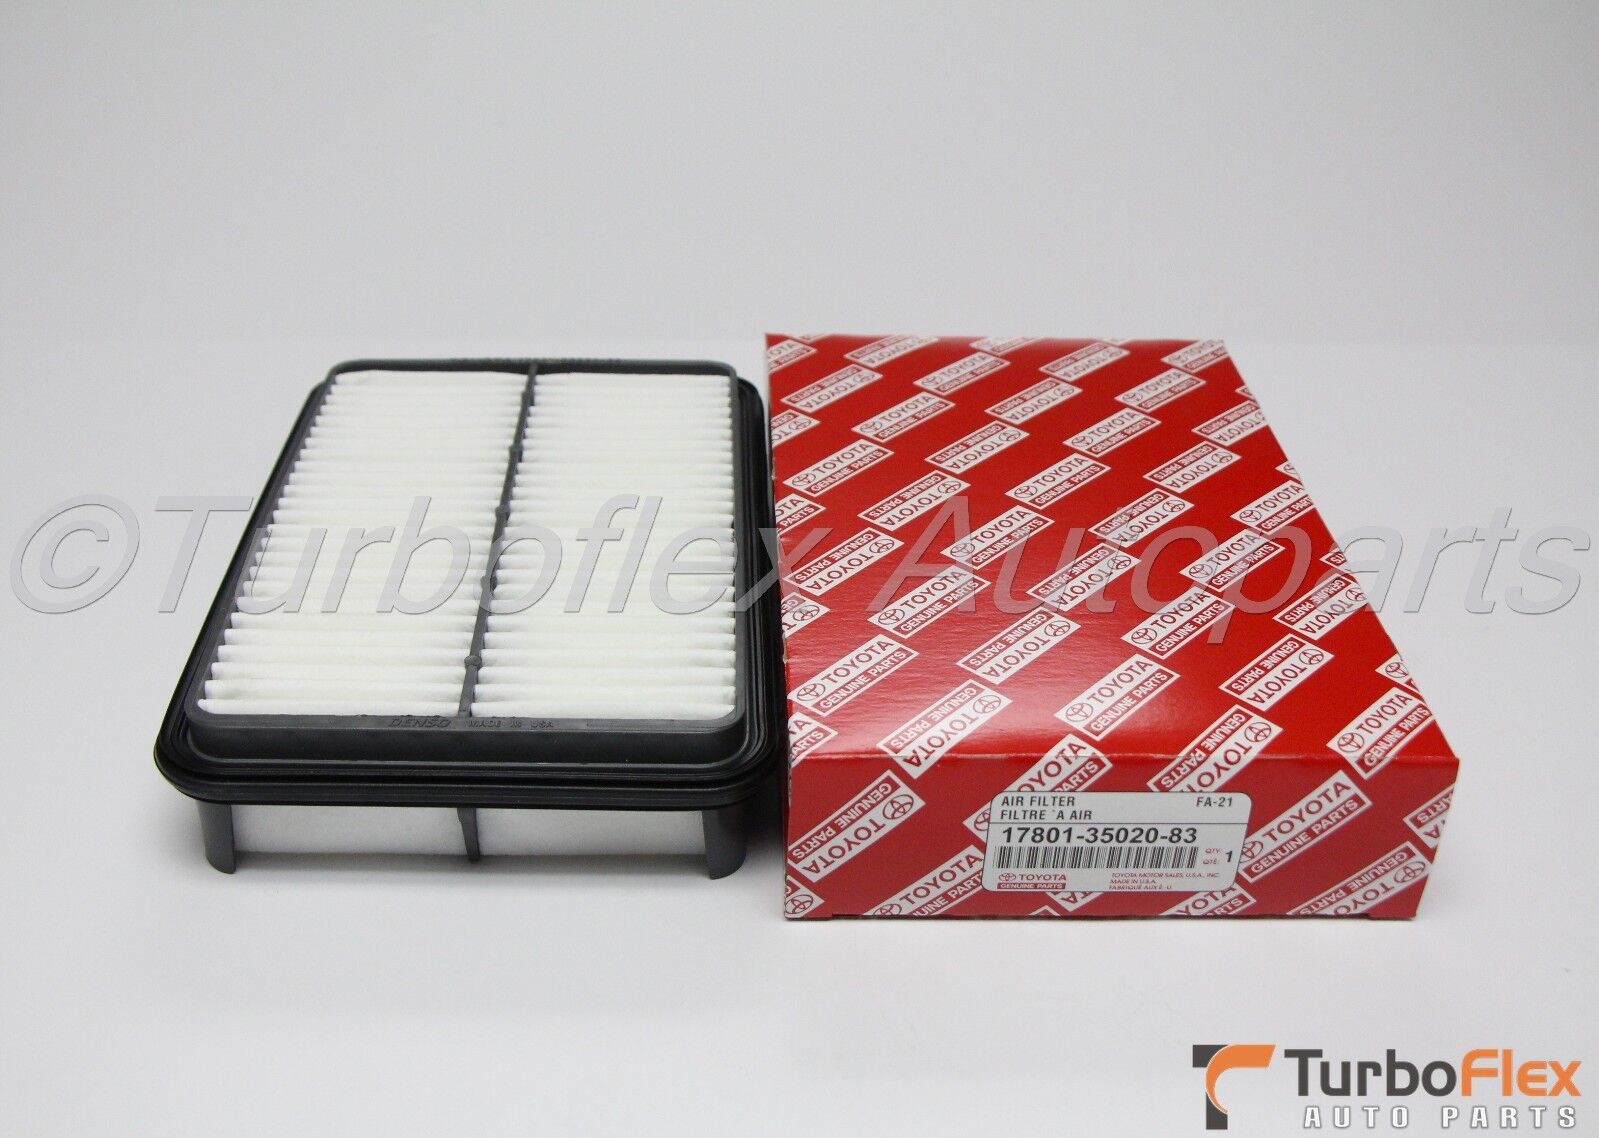 Toyota Tacoma 4Runner 4Cyl Previa Air Filter Genuine OEM 17801-35020-83